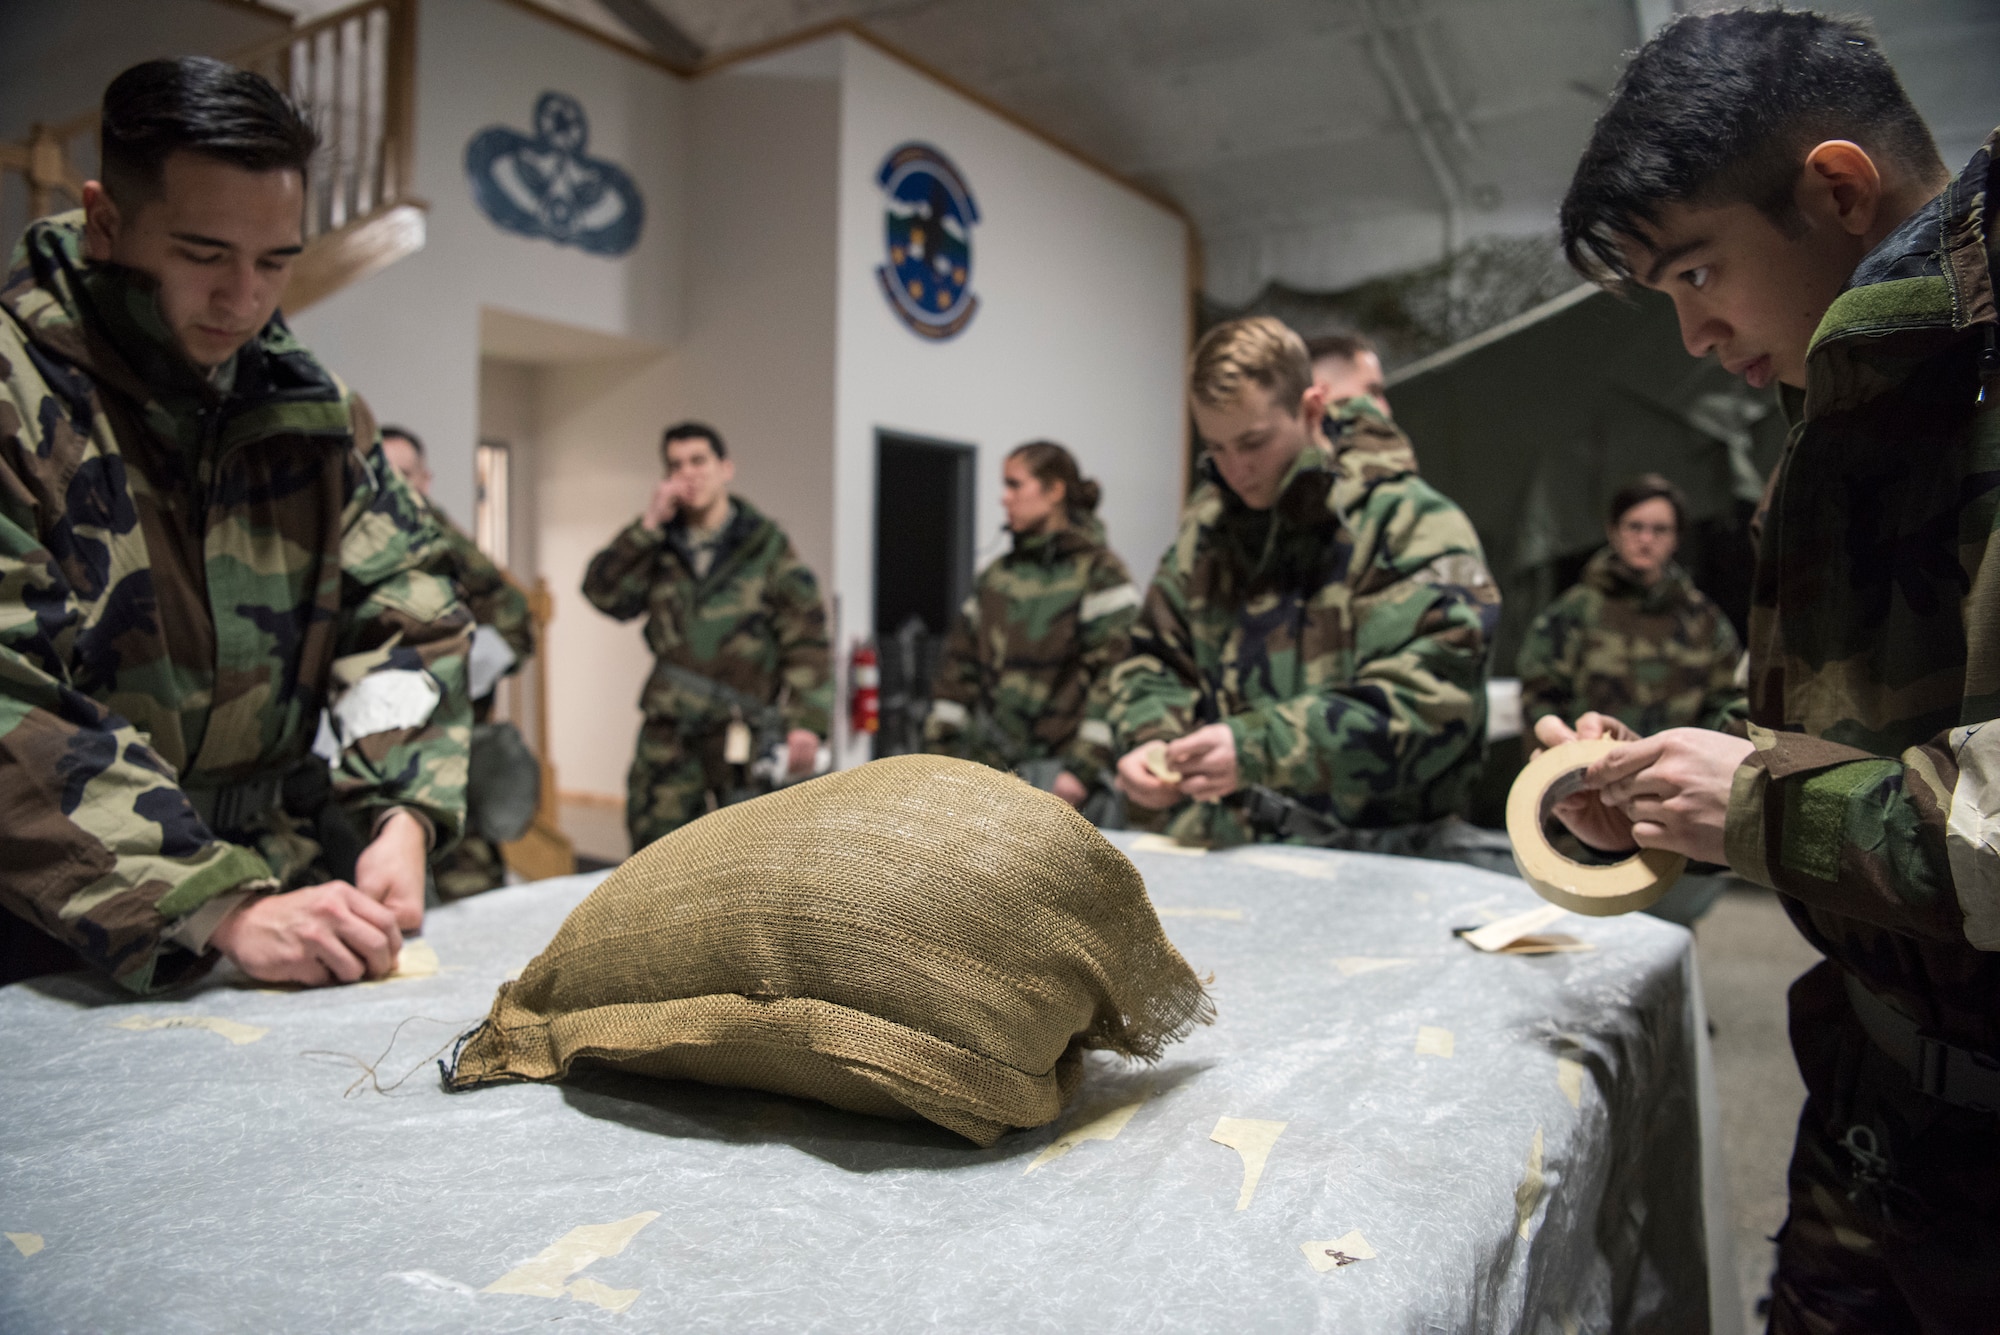 A group of U.S. Air Force Airmen place M-8 paper on a simulated piece of equipment during a newly-implemented chemical, biological, radiological and nuclear defense training course exercise at Joint Base Elmendorf-Richardson, Alaska, Jan. 8, 2019. One of the key changes made embraces the reintegration of hands-on, in-person instruction, and reduces computer based training, allowing Airmen to receive a more tailored learning experience. (U.S. Air Force photo by Airman 1st Class Crystal A. Jenkins)